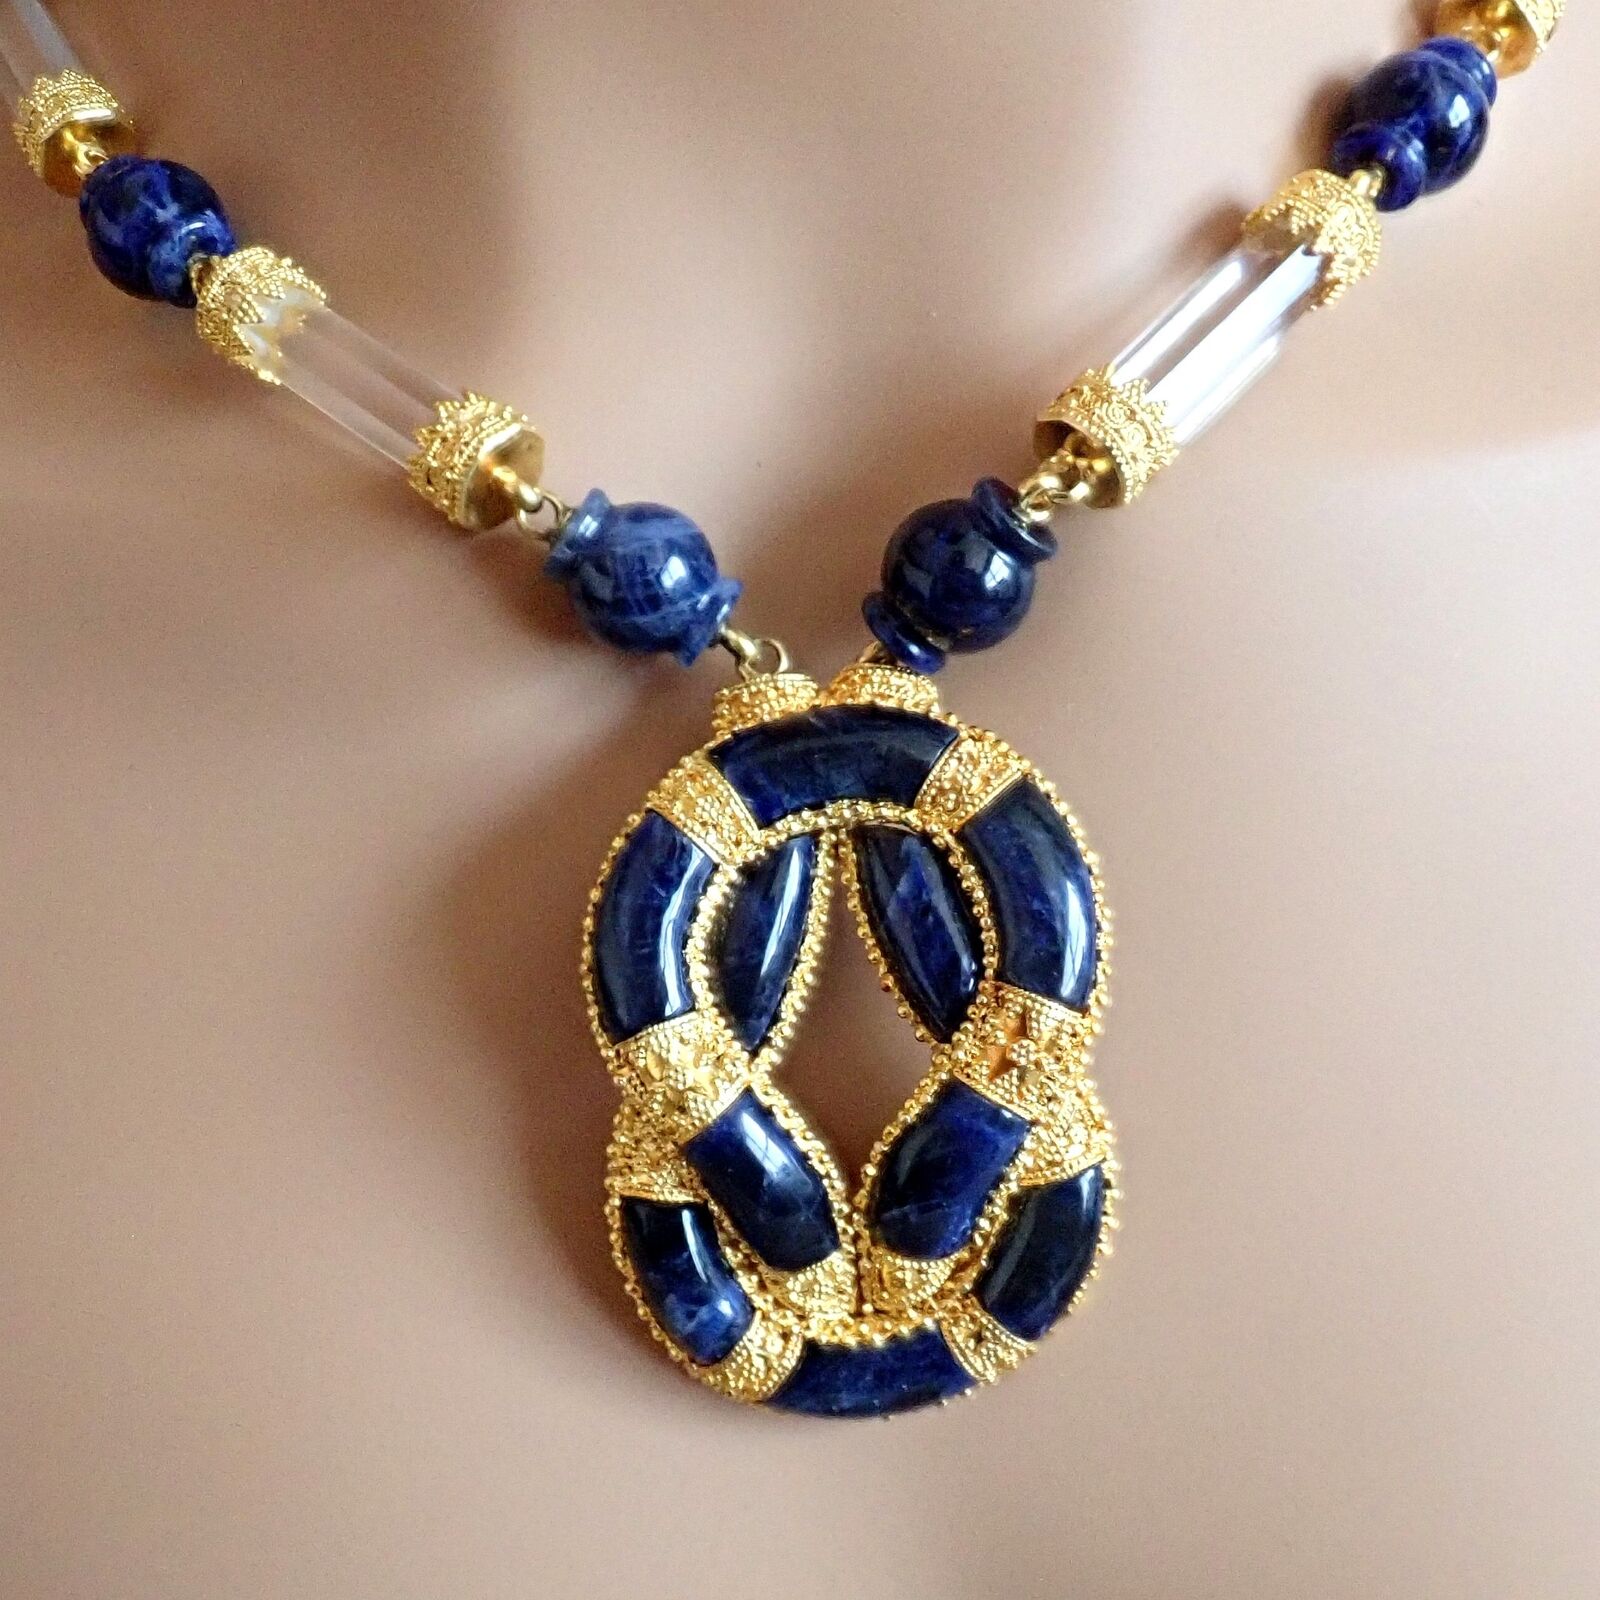 Ilias Lalaounis Jewelry & Watches:Fine Jewelry:Necklaces & Pendants Rare! Authentic Ilias Lalaounis 18k Gold Sodalite Crystal Hercules Knot Necklace